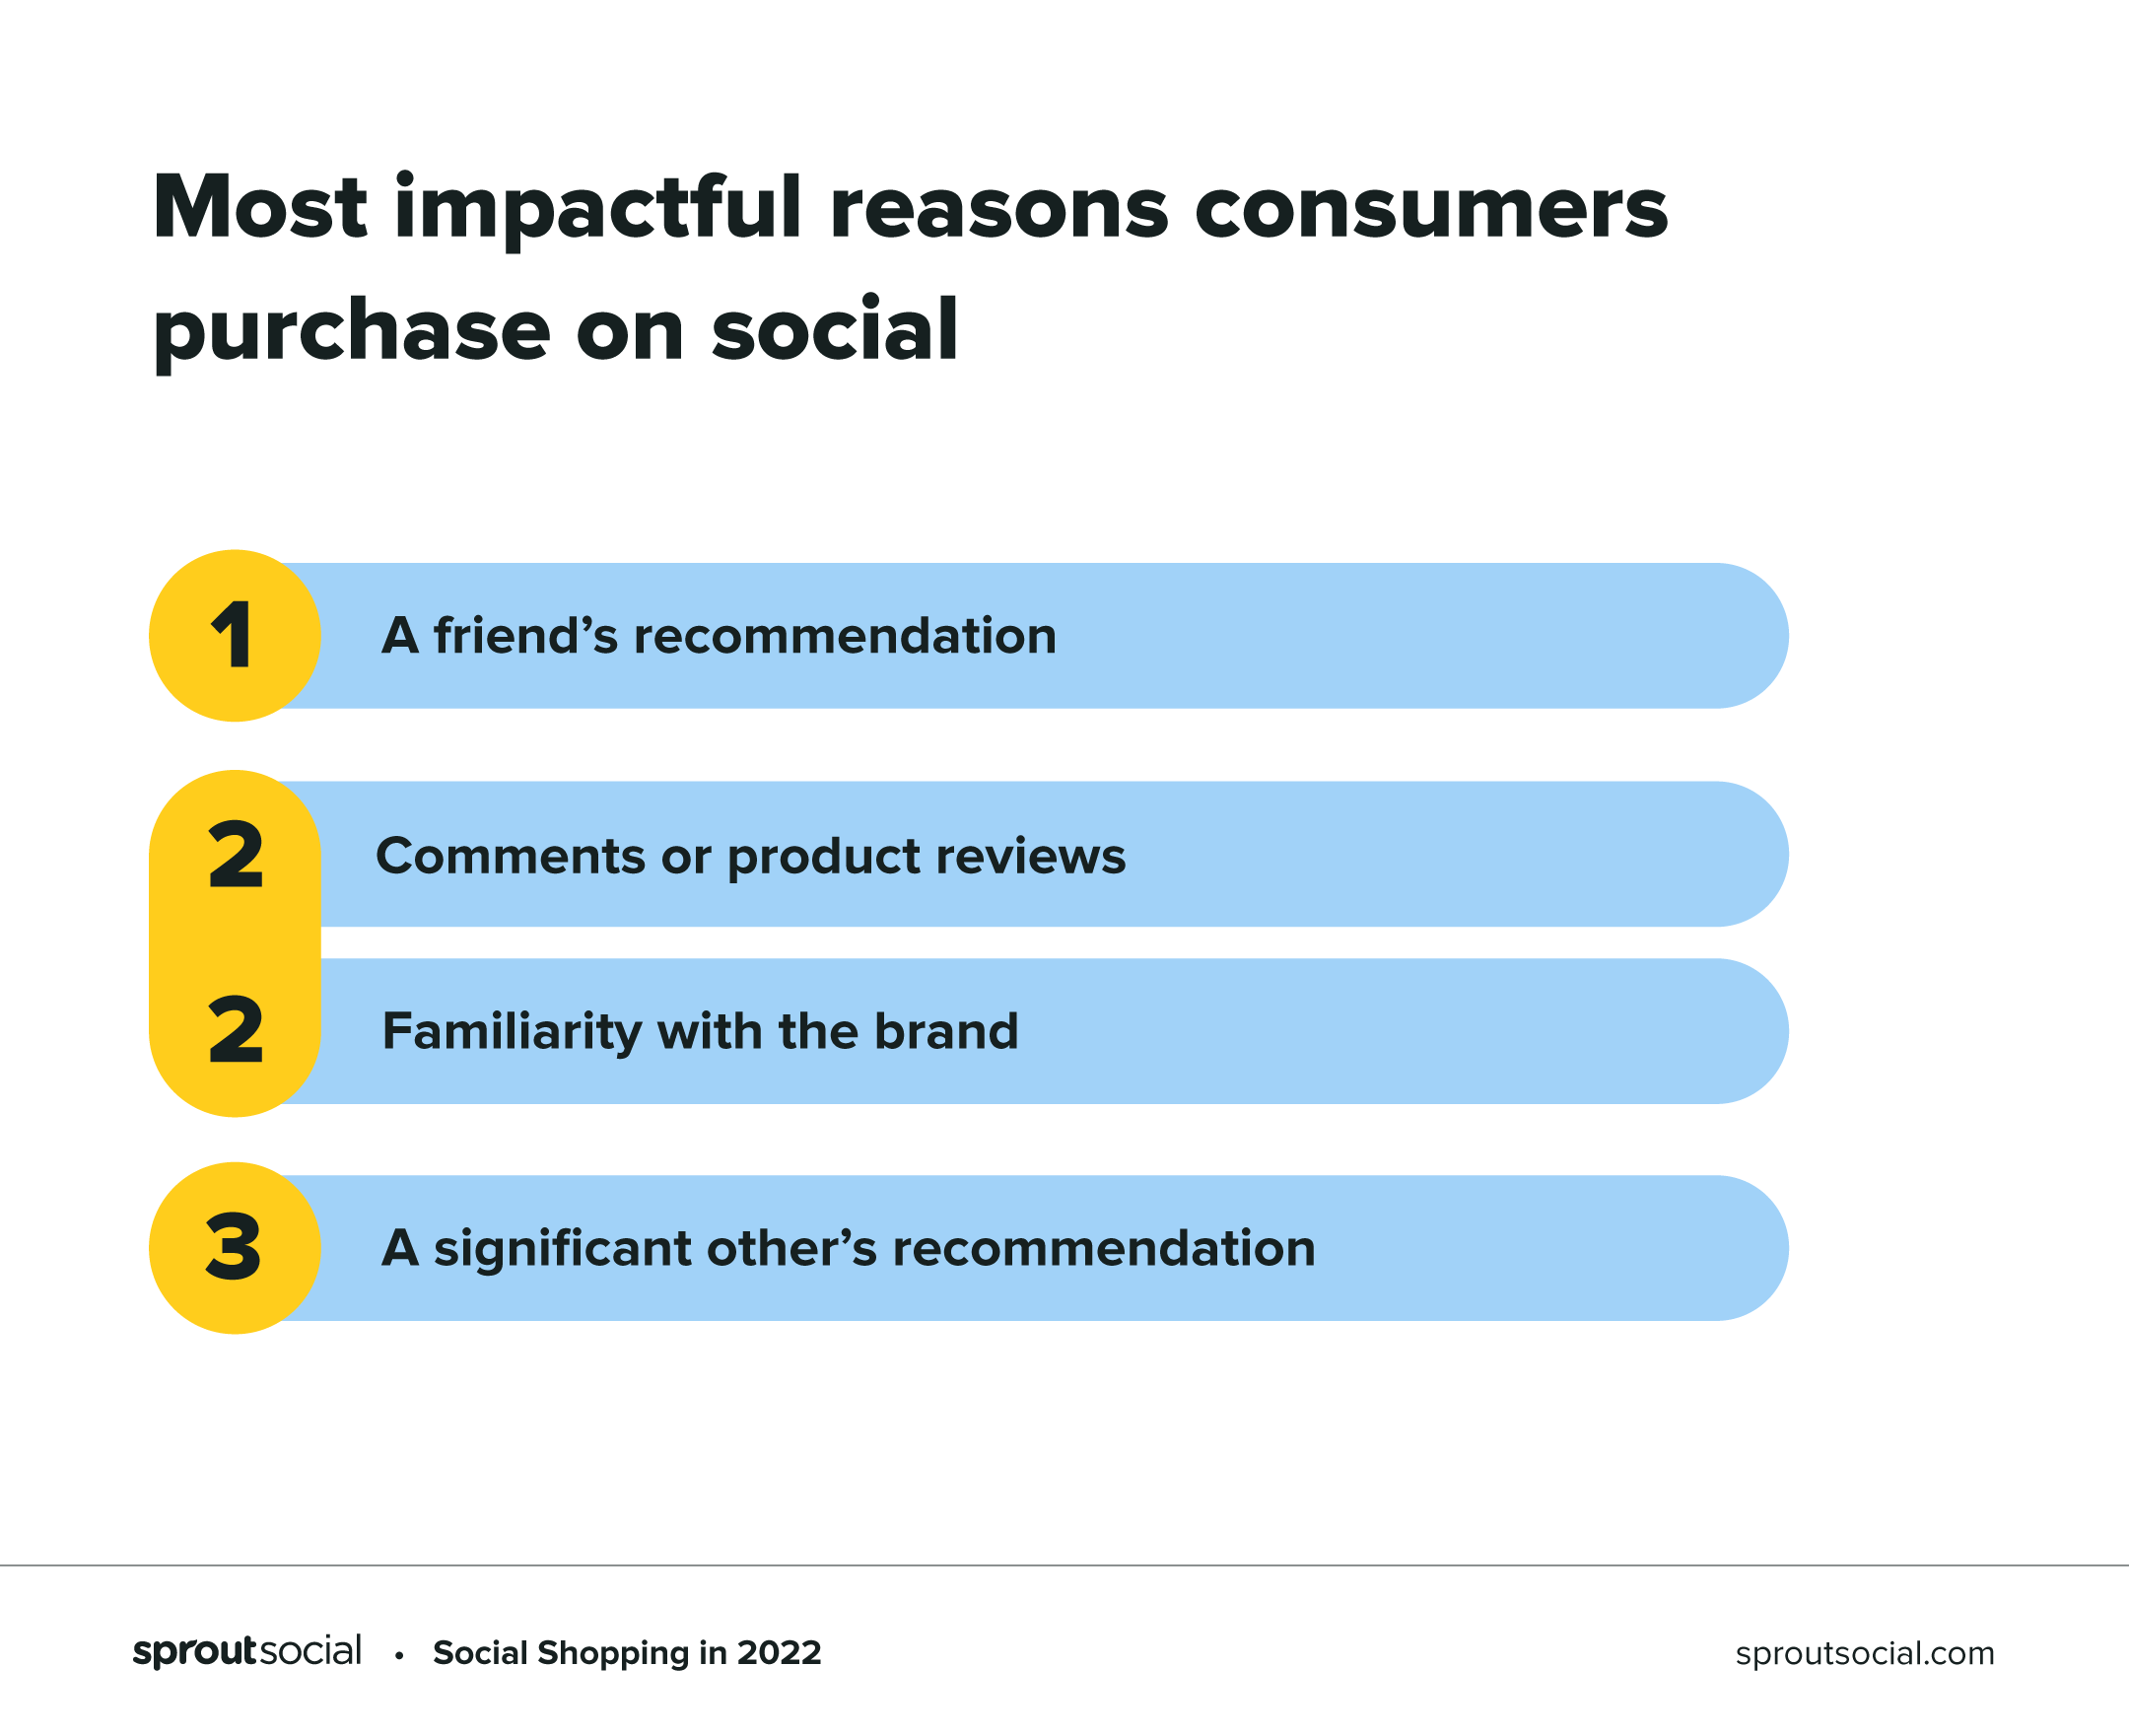 Graph showing the most impactful reasons consumers purchase on social media.